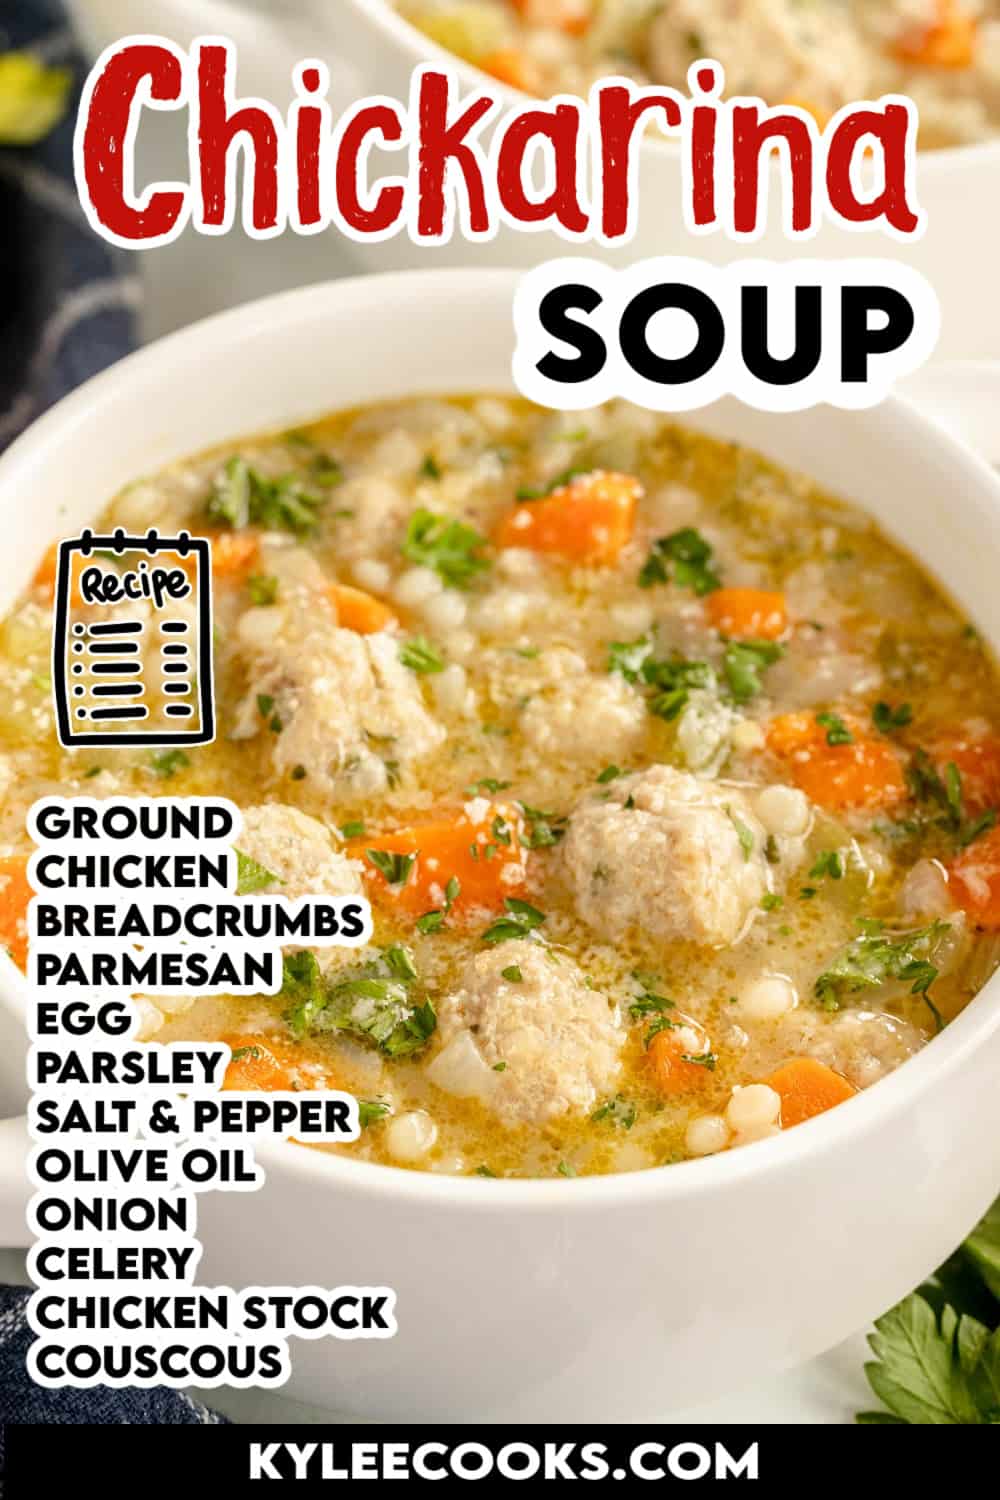 chickarina soup in a bowl with recipe name and ingredients overlaid in text.